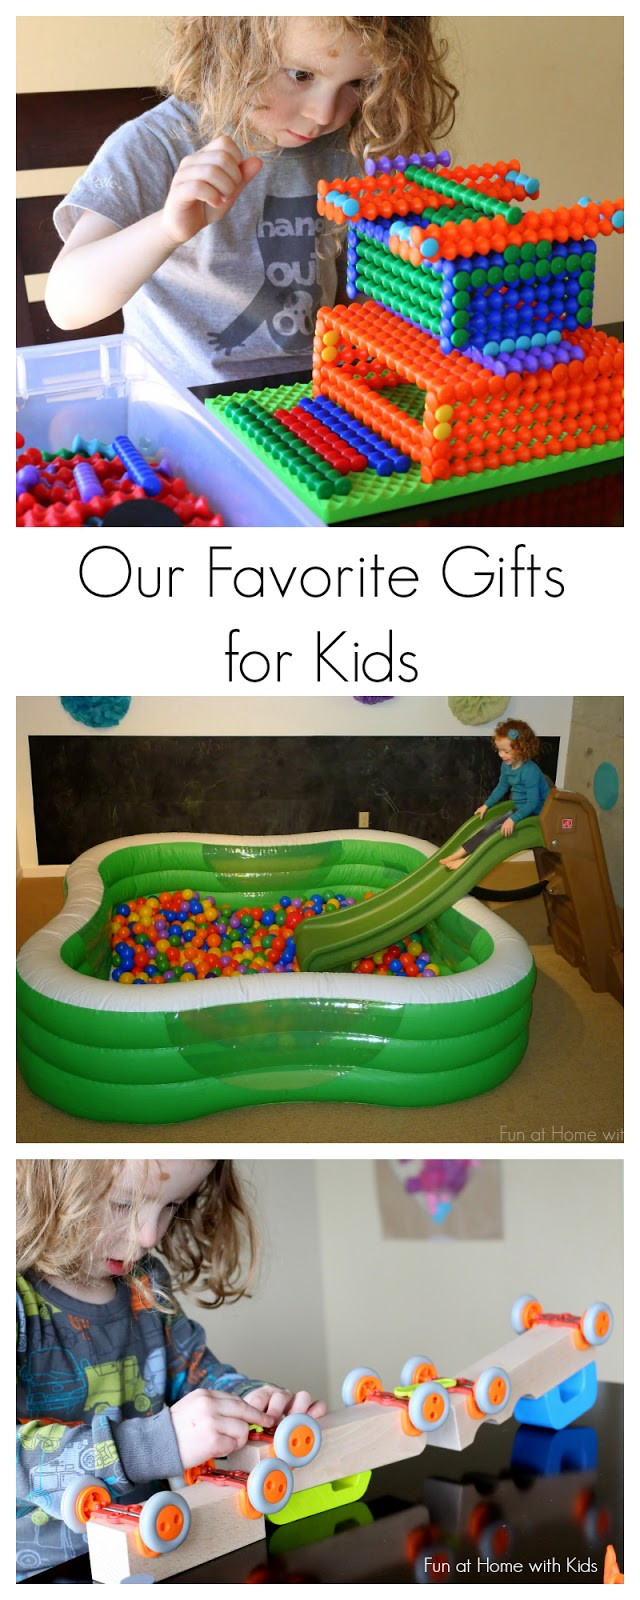 Toddler Birthday Gift Ideas
 Our 10 Best and Favorite Gift Ideas for Kids